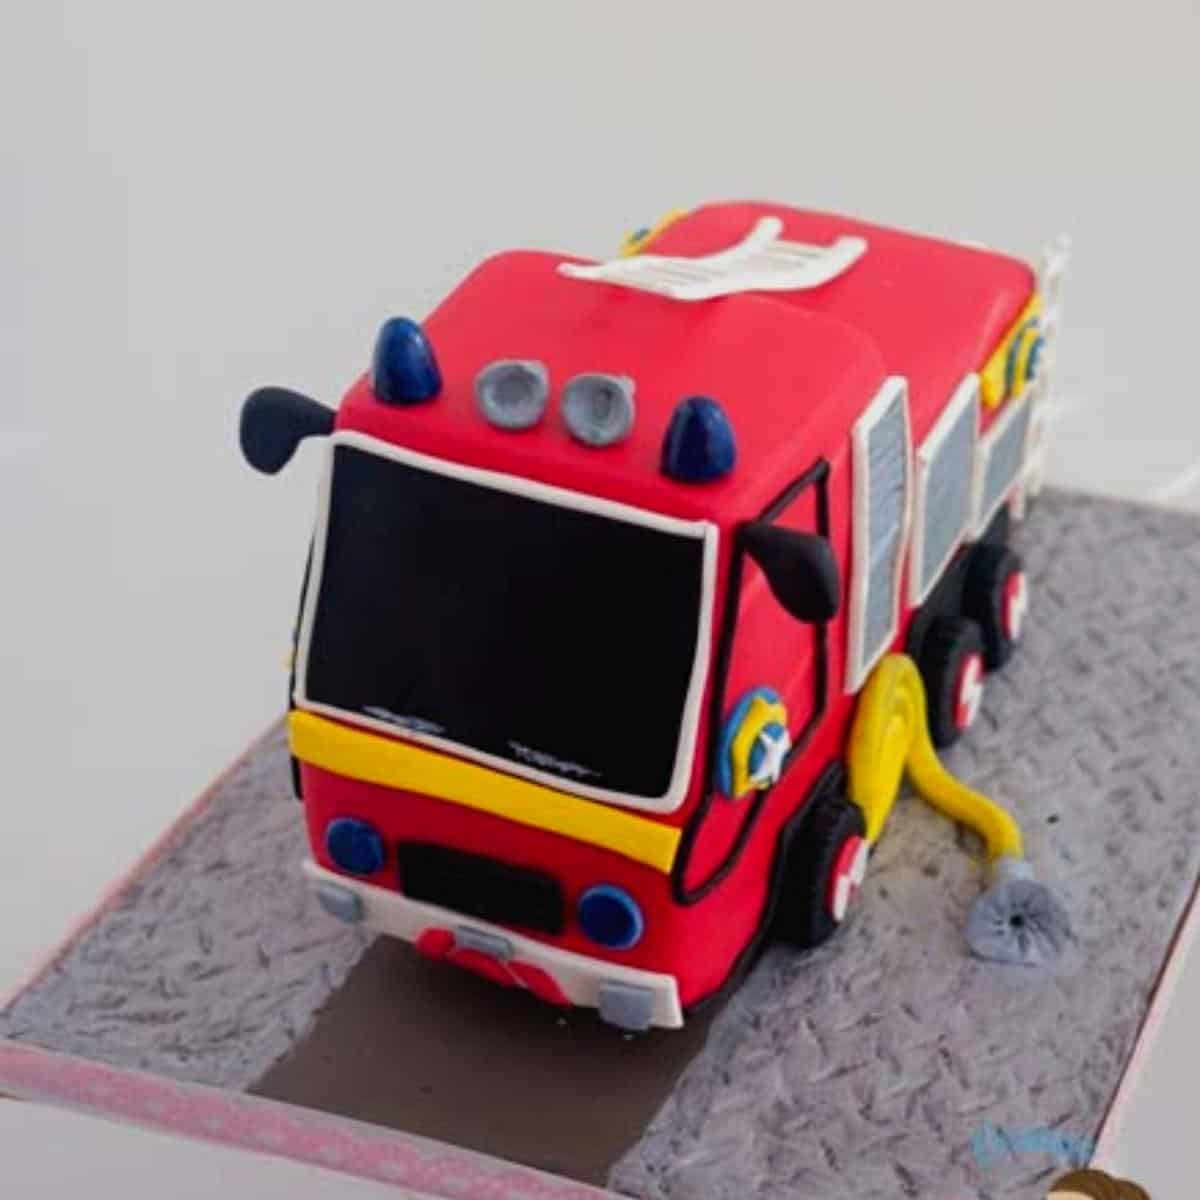 A frosted cake with fire truck cake.